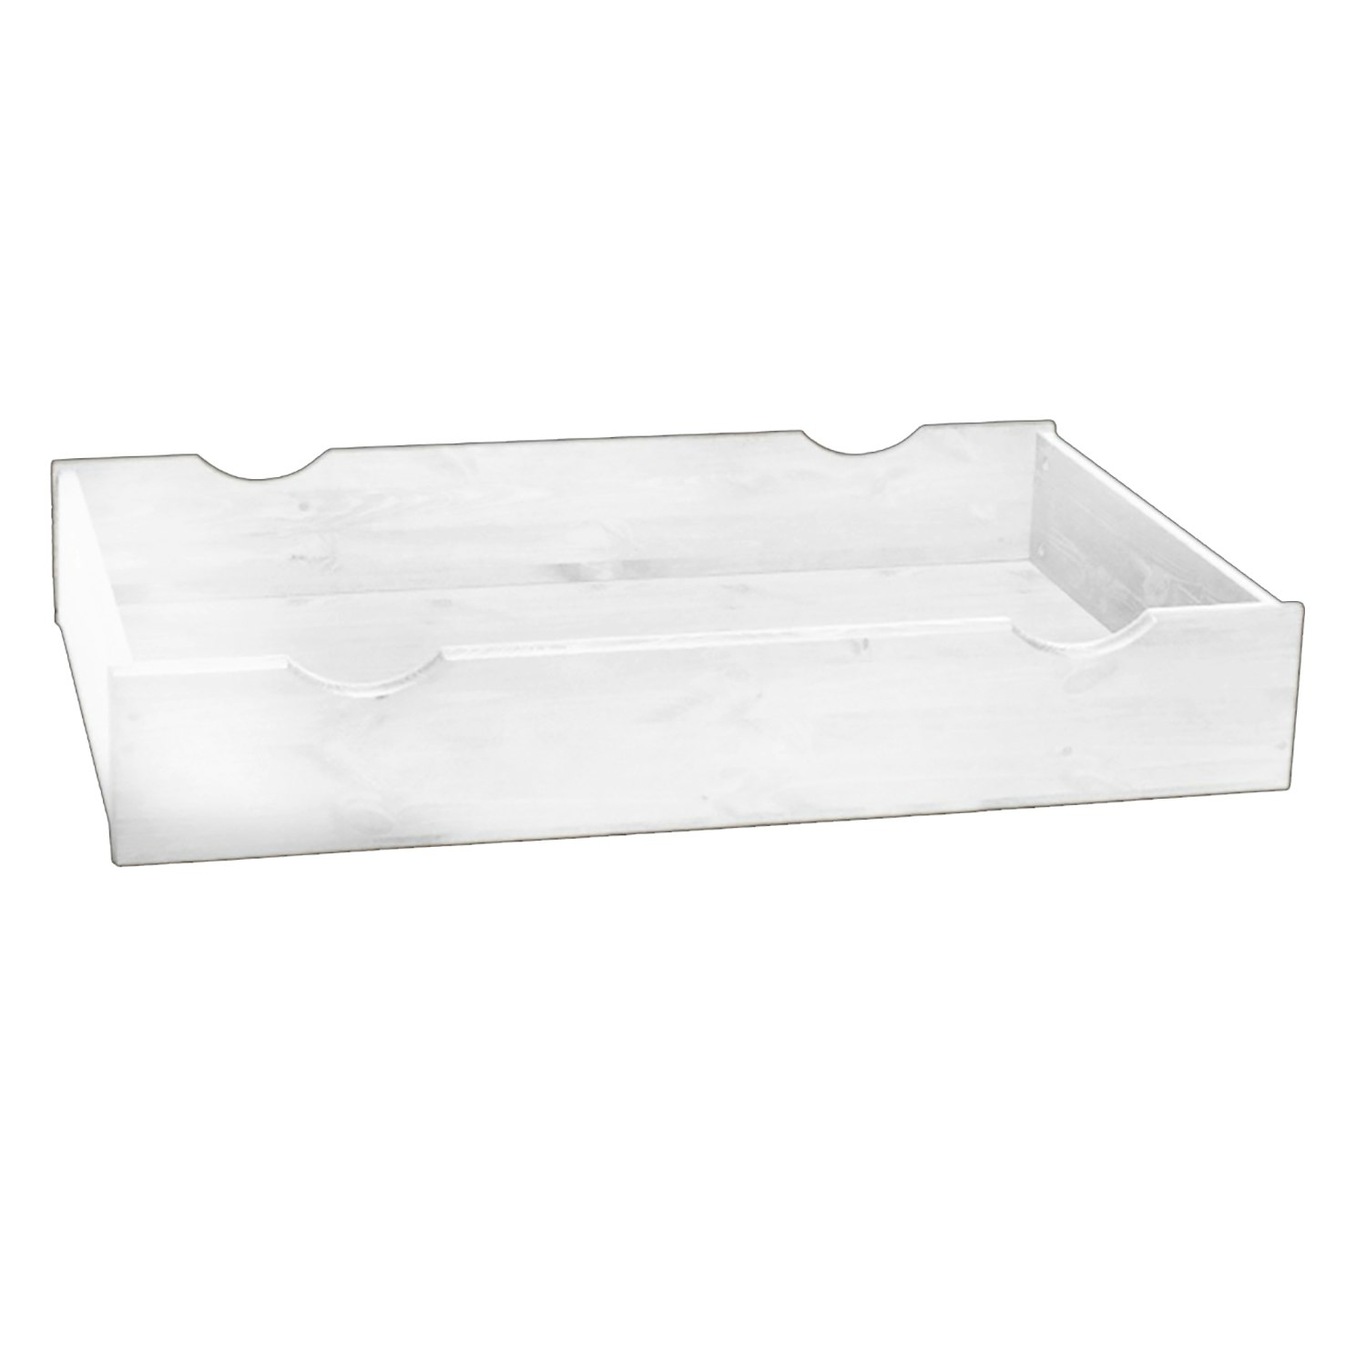 Vejby Under Bed Storage, White Lacquer